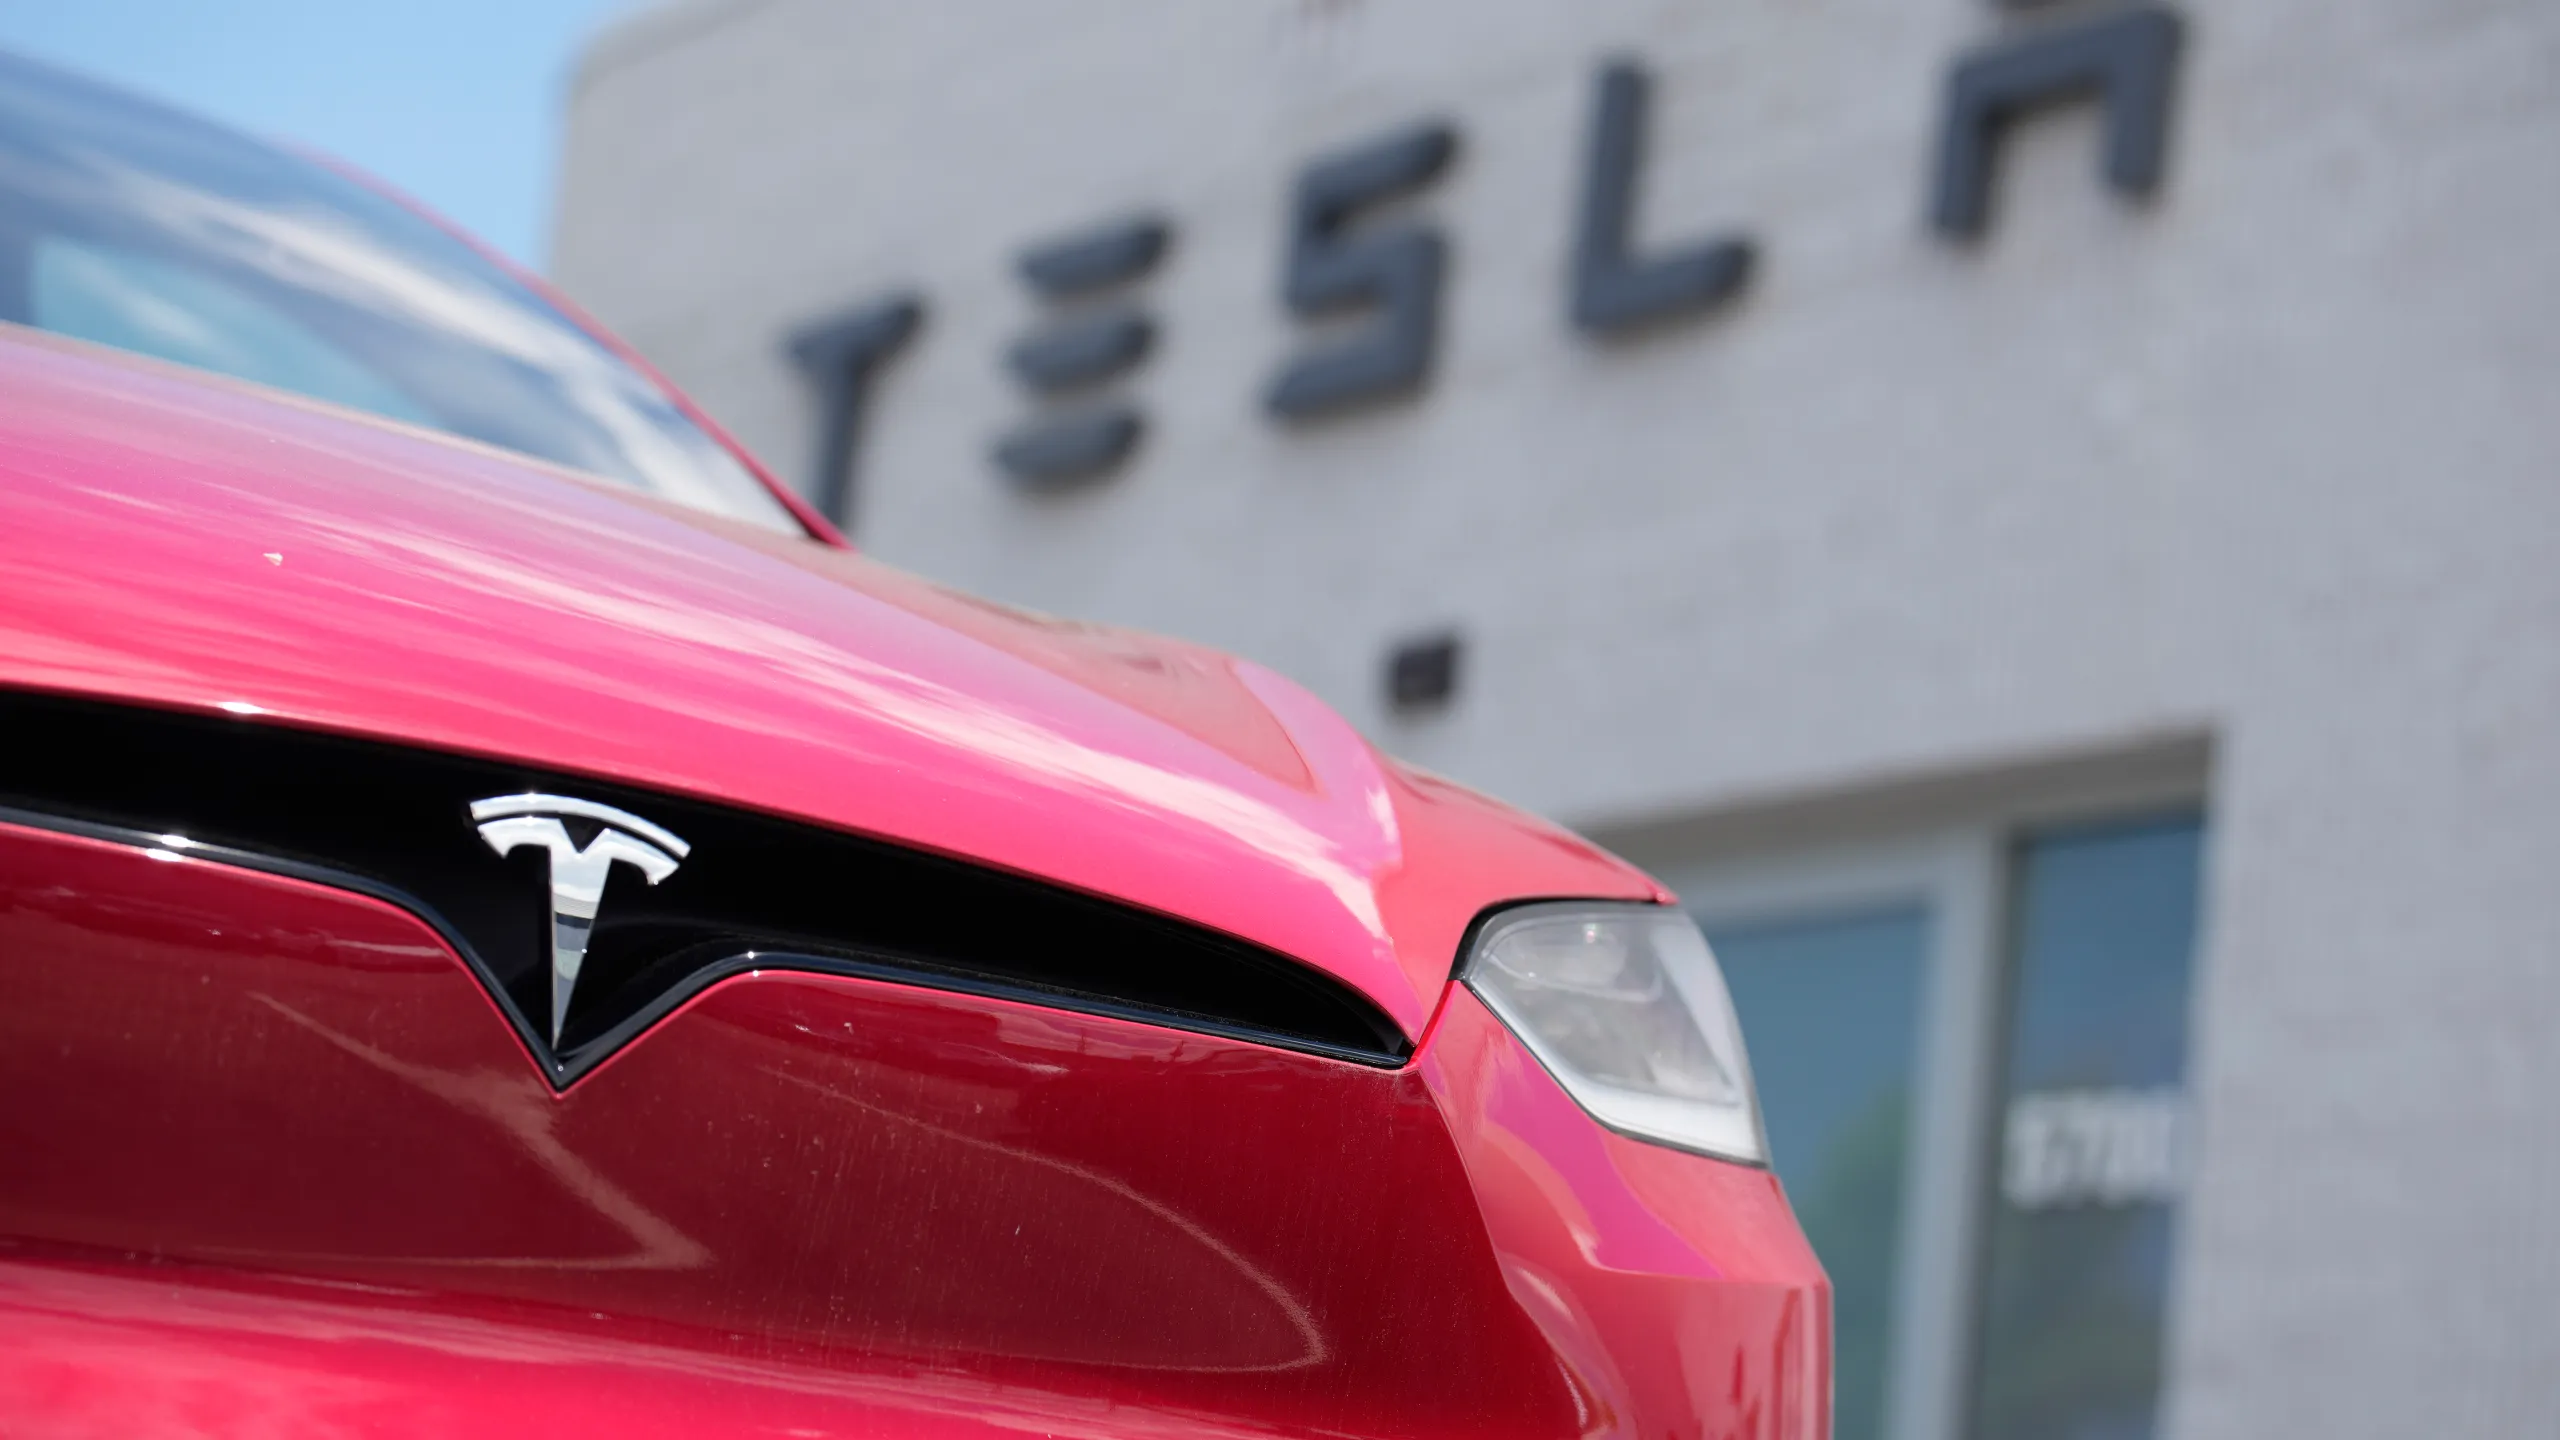 Tesla Cancels Intern Offers Suddenly, Leaving College Students Scrambling for Alternatives